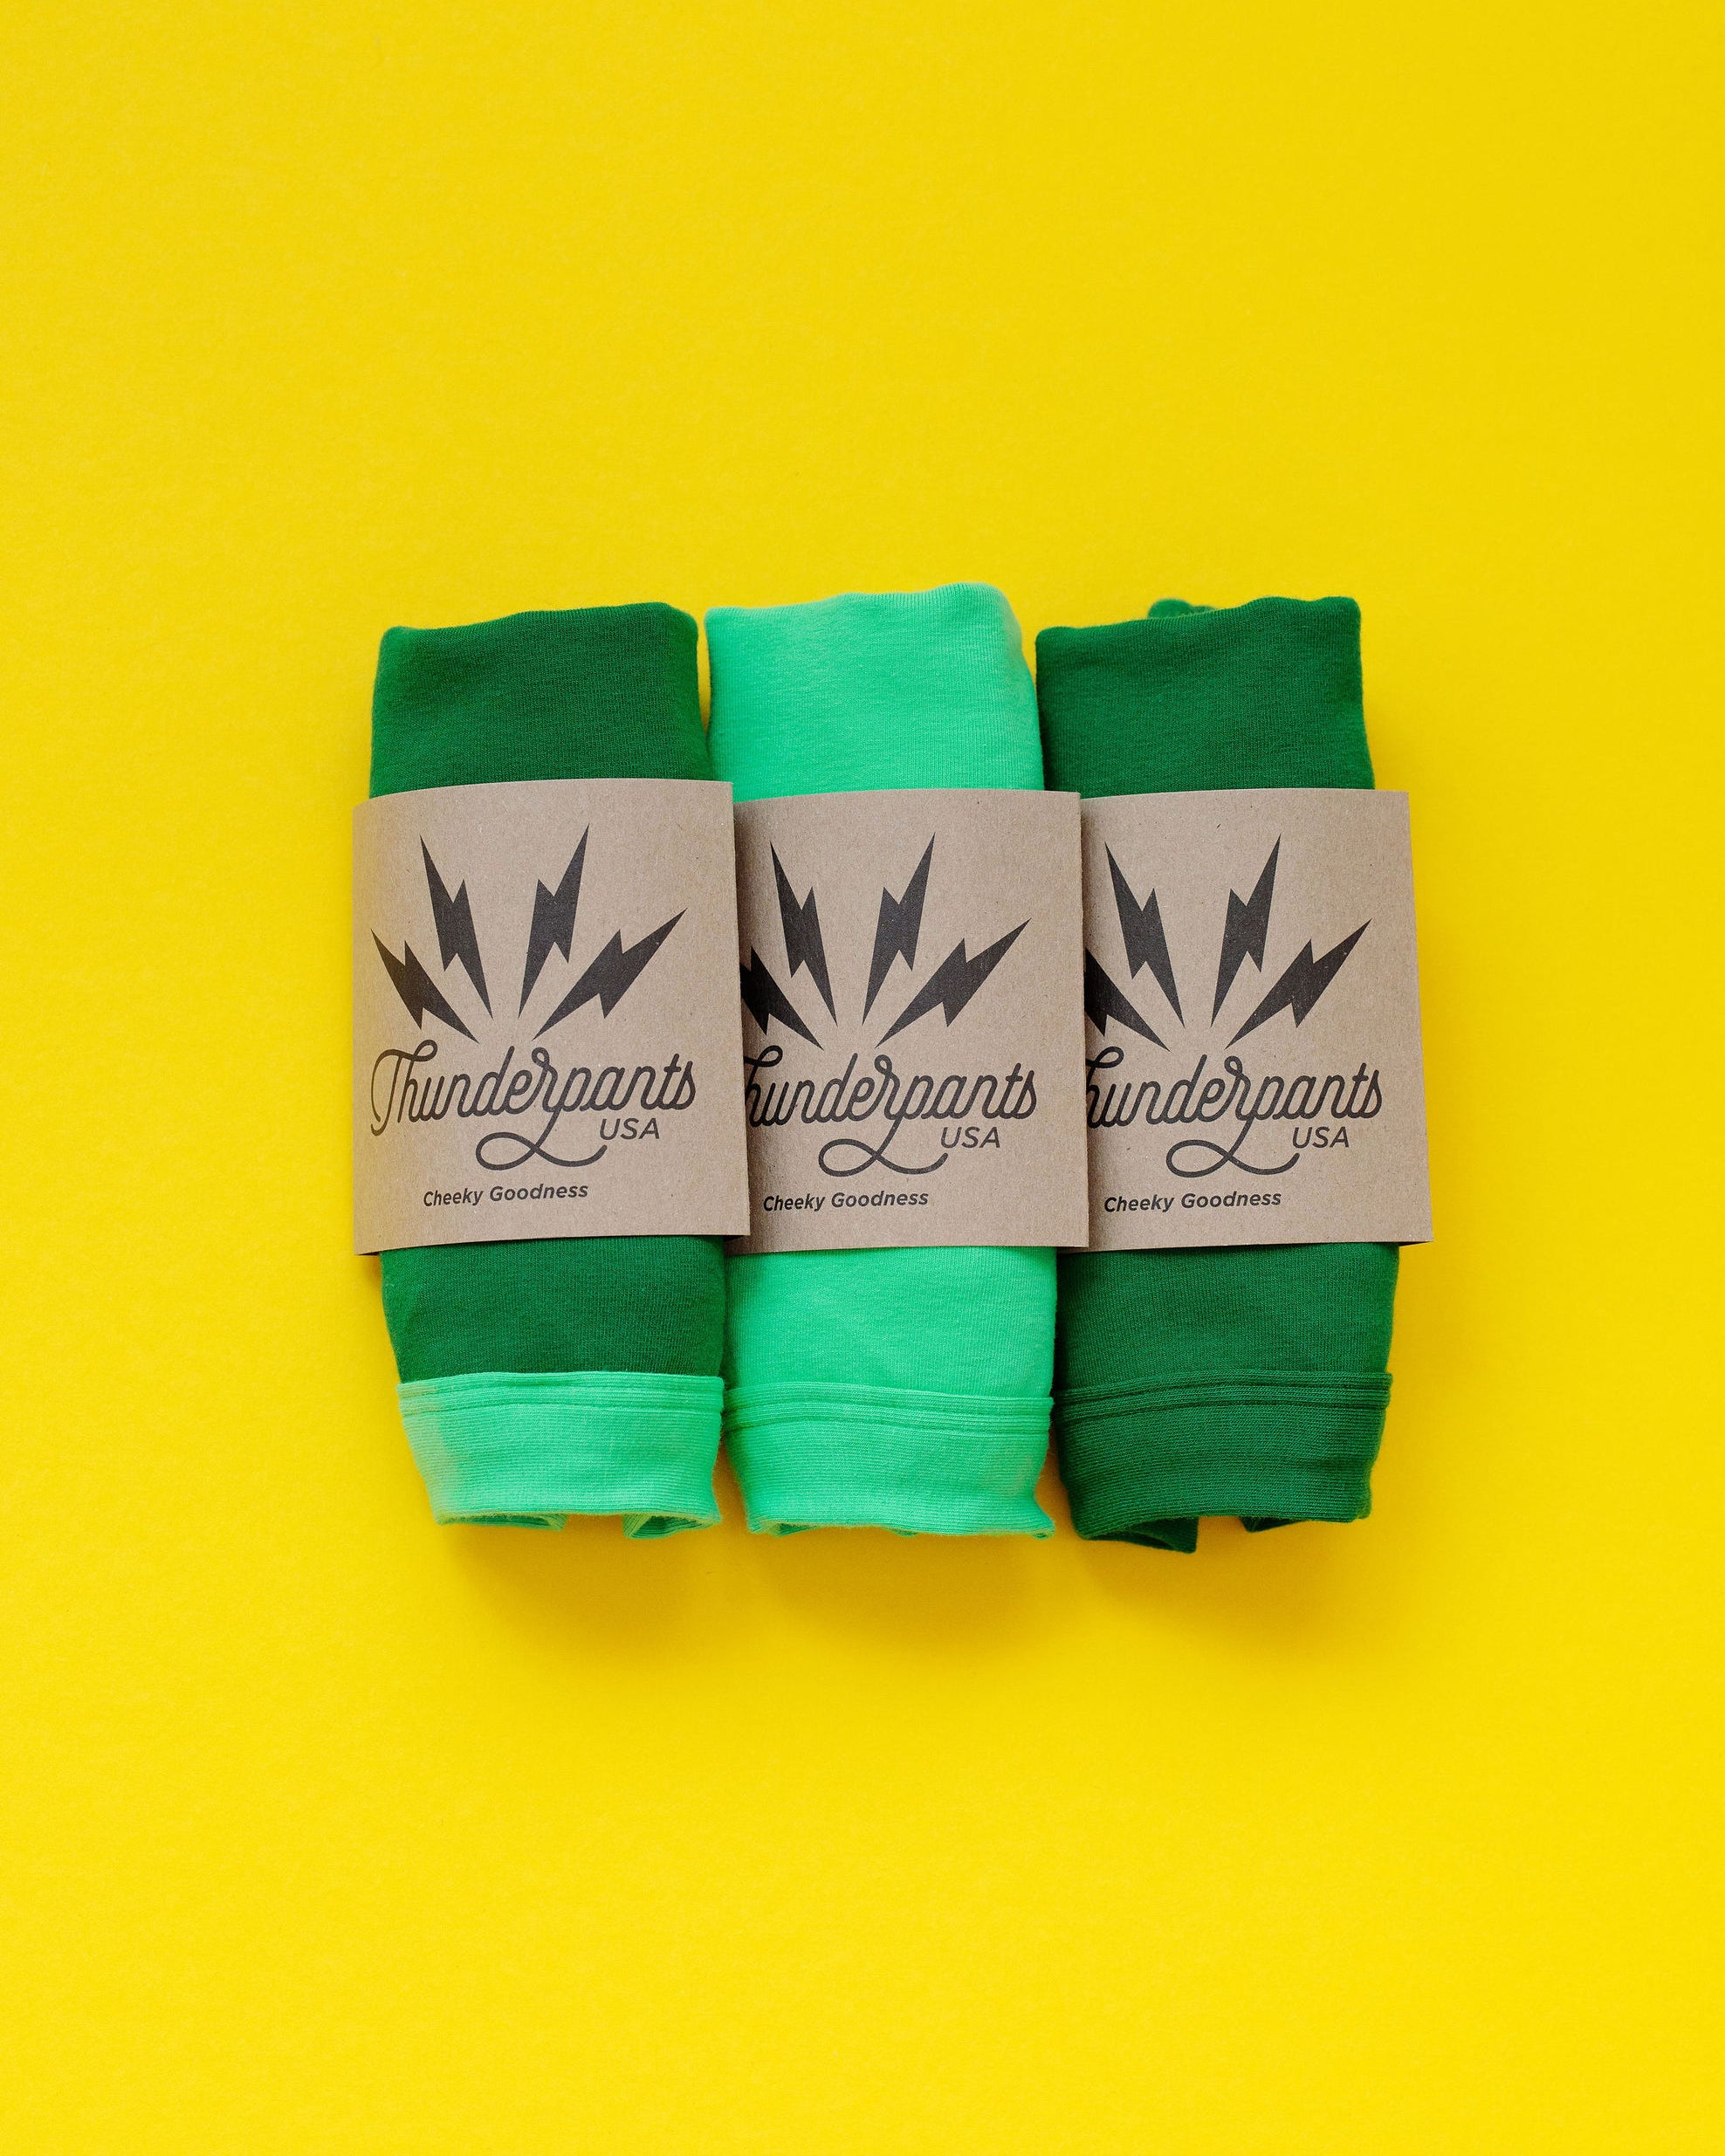 Three different green colored packaged underwear on a yellow background.